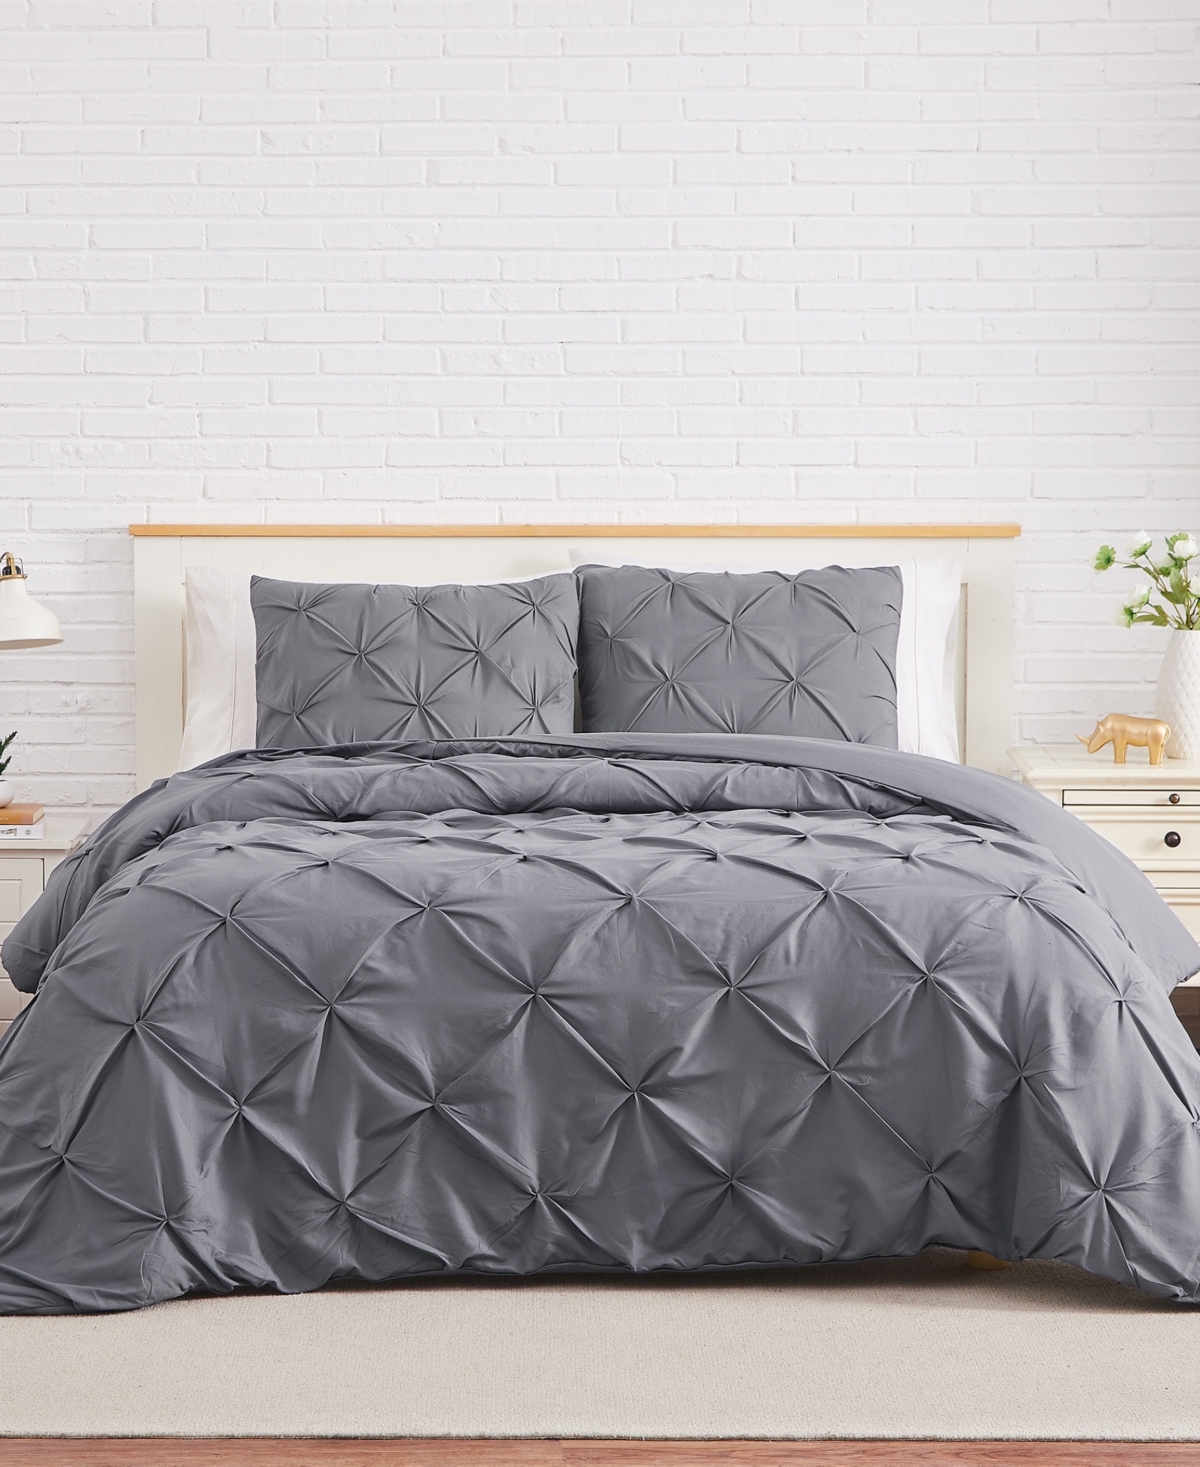 Southshore Fine Linens Pintuck 3 Piece Duvet Cover And Sham Set, Full/queen In Slate